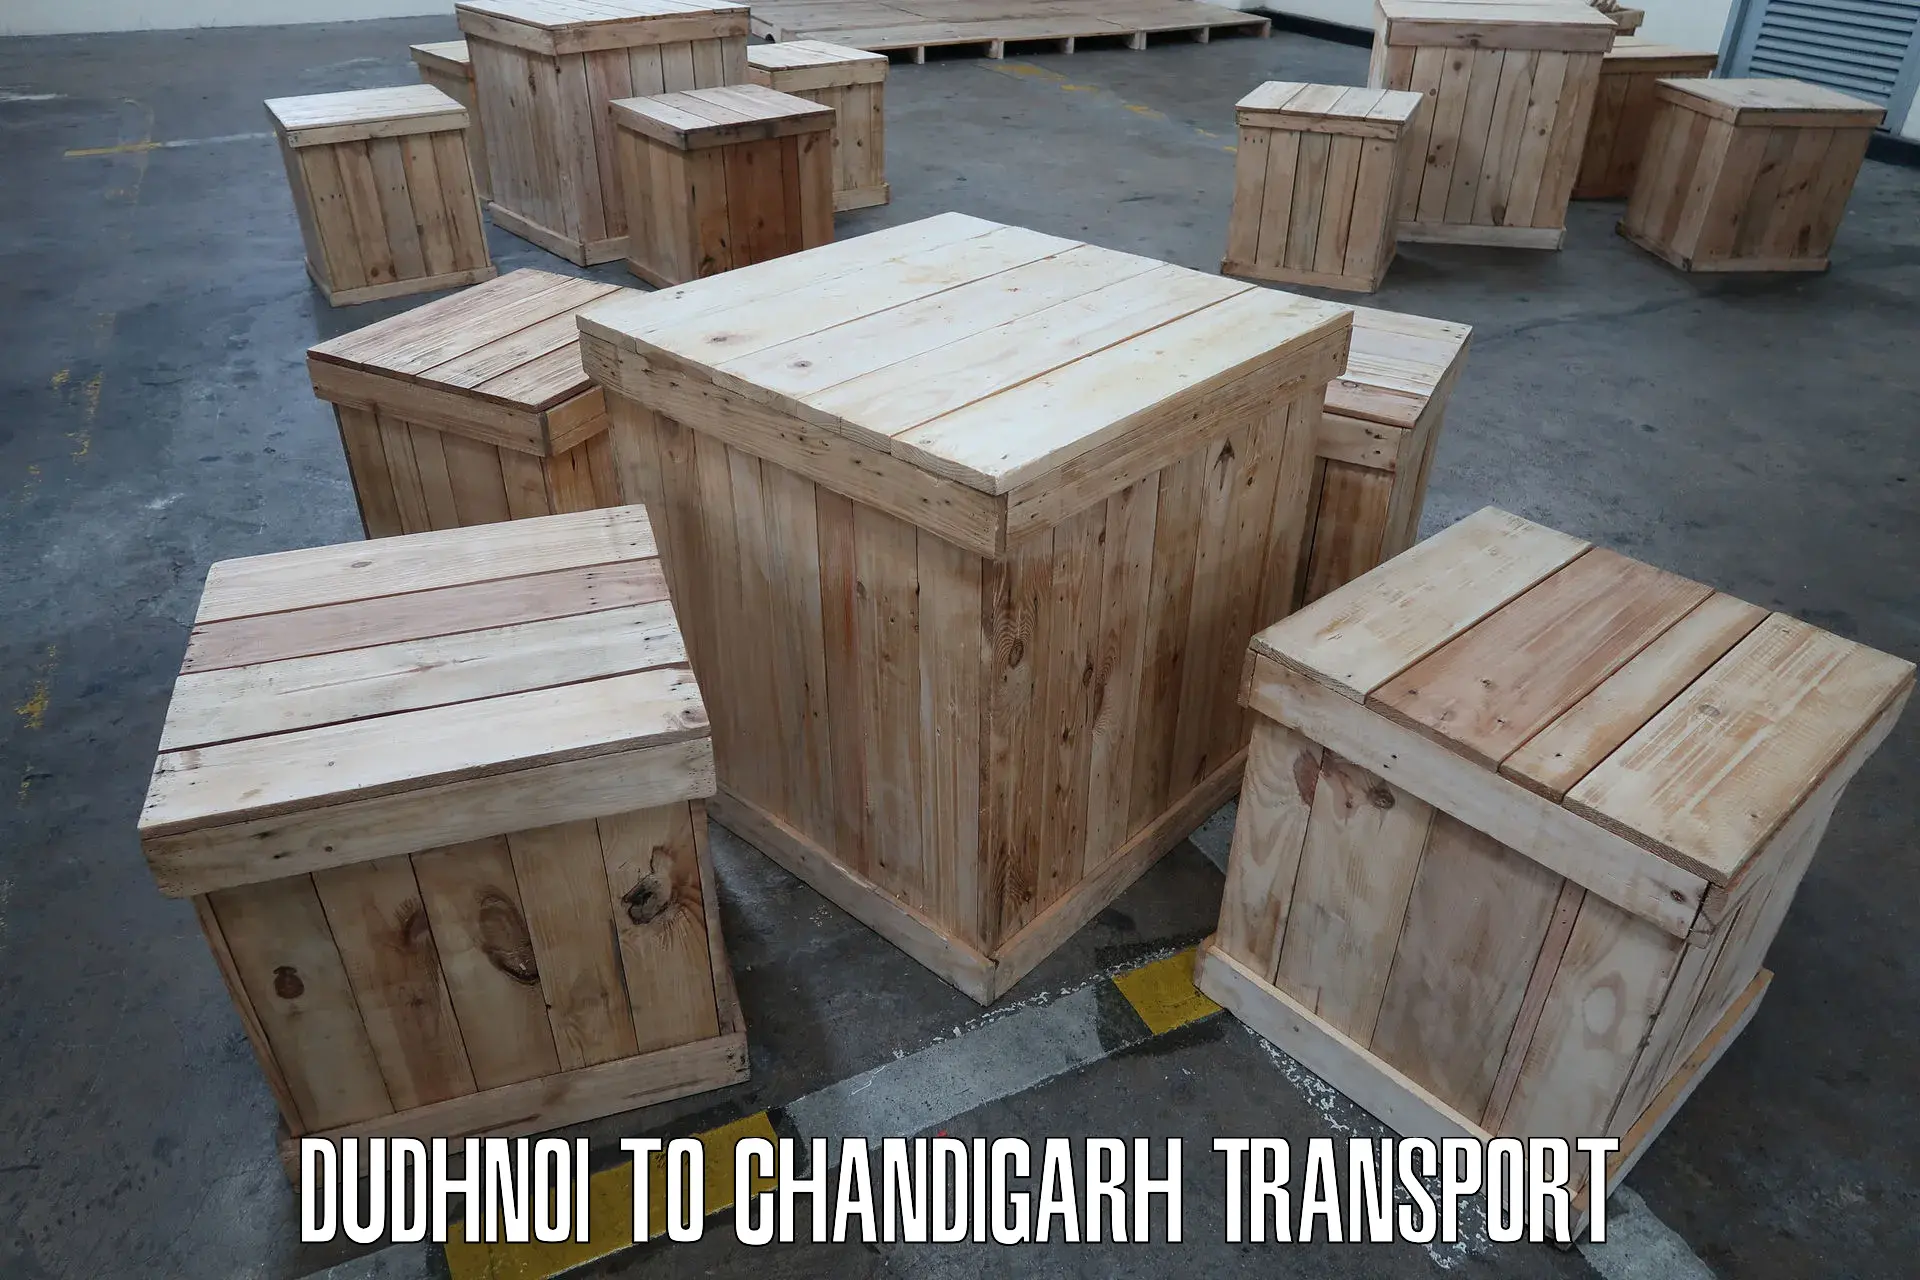 Land transport services Dudhnoi to Chandigarh